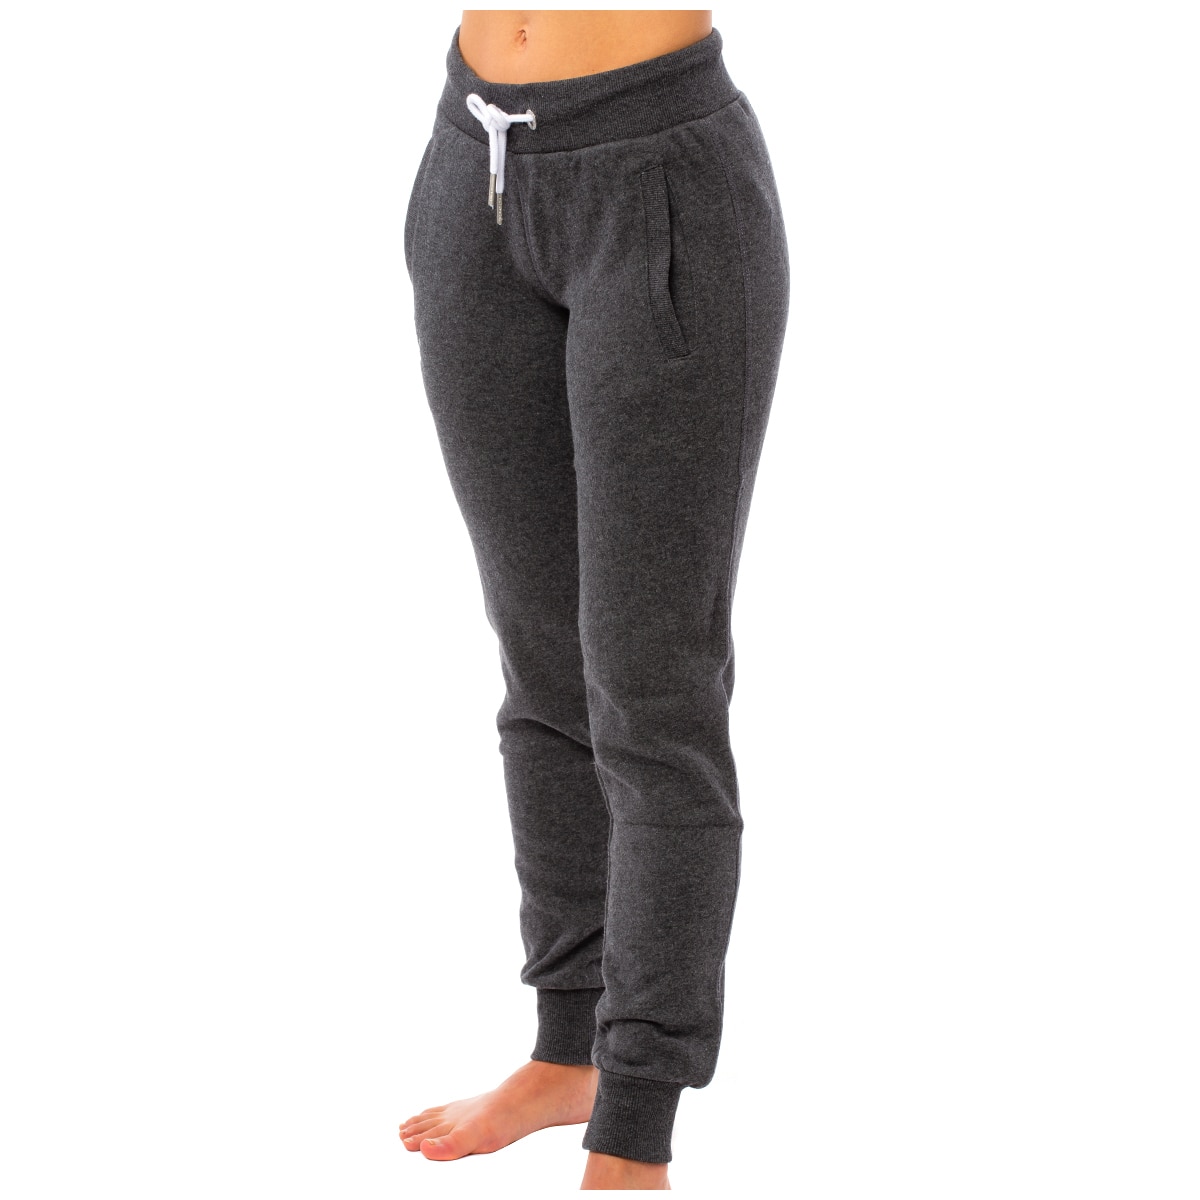 Superdry Women's Pant - Charcoal Marle